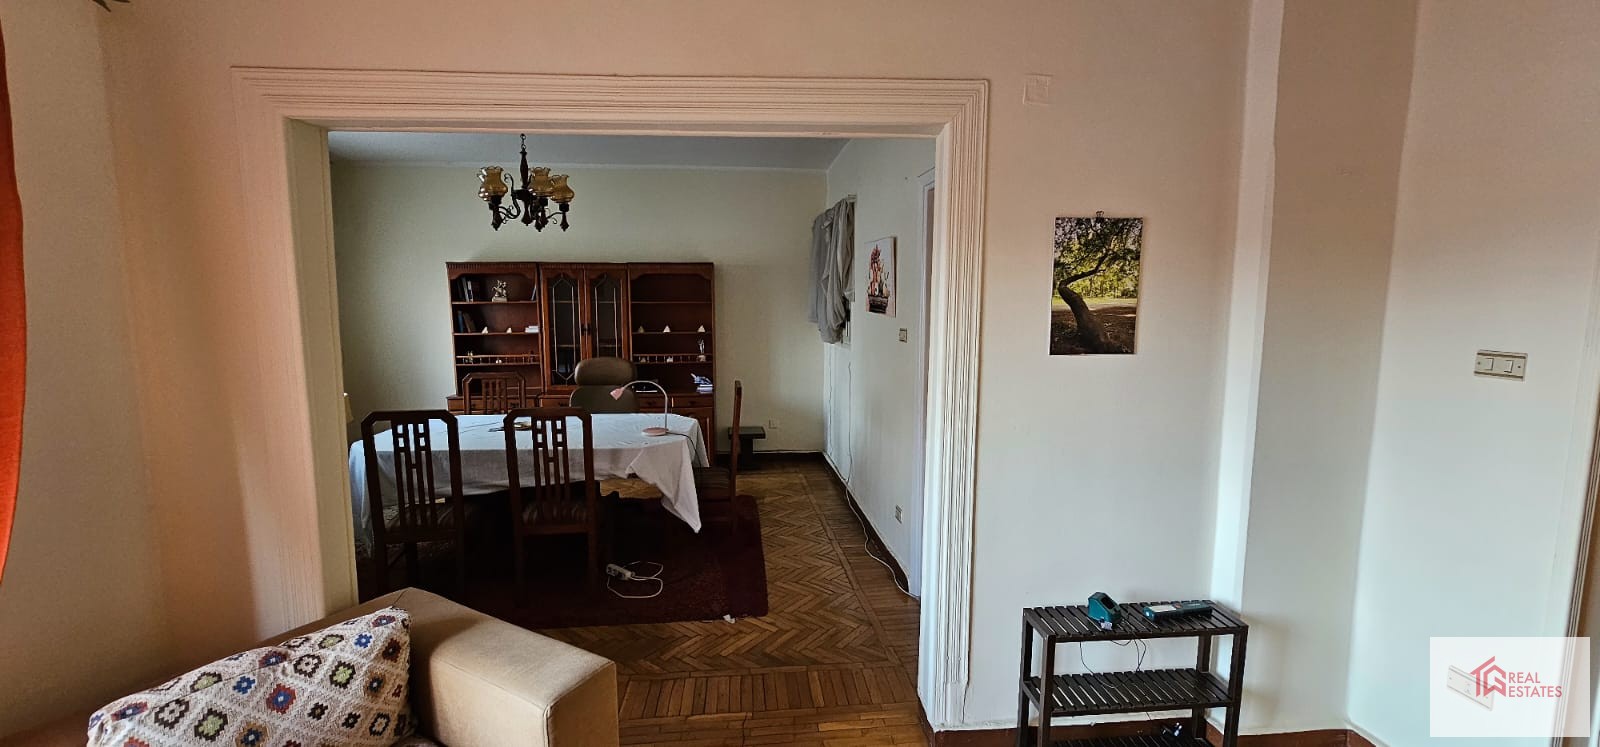 Furnished flat for rent in el malek el Afdal Zamalek Cairo Egypt 2 bedrooms ,1 bathroom 1 toilet and one balcony Nile view . Rent